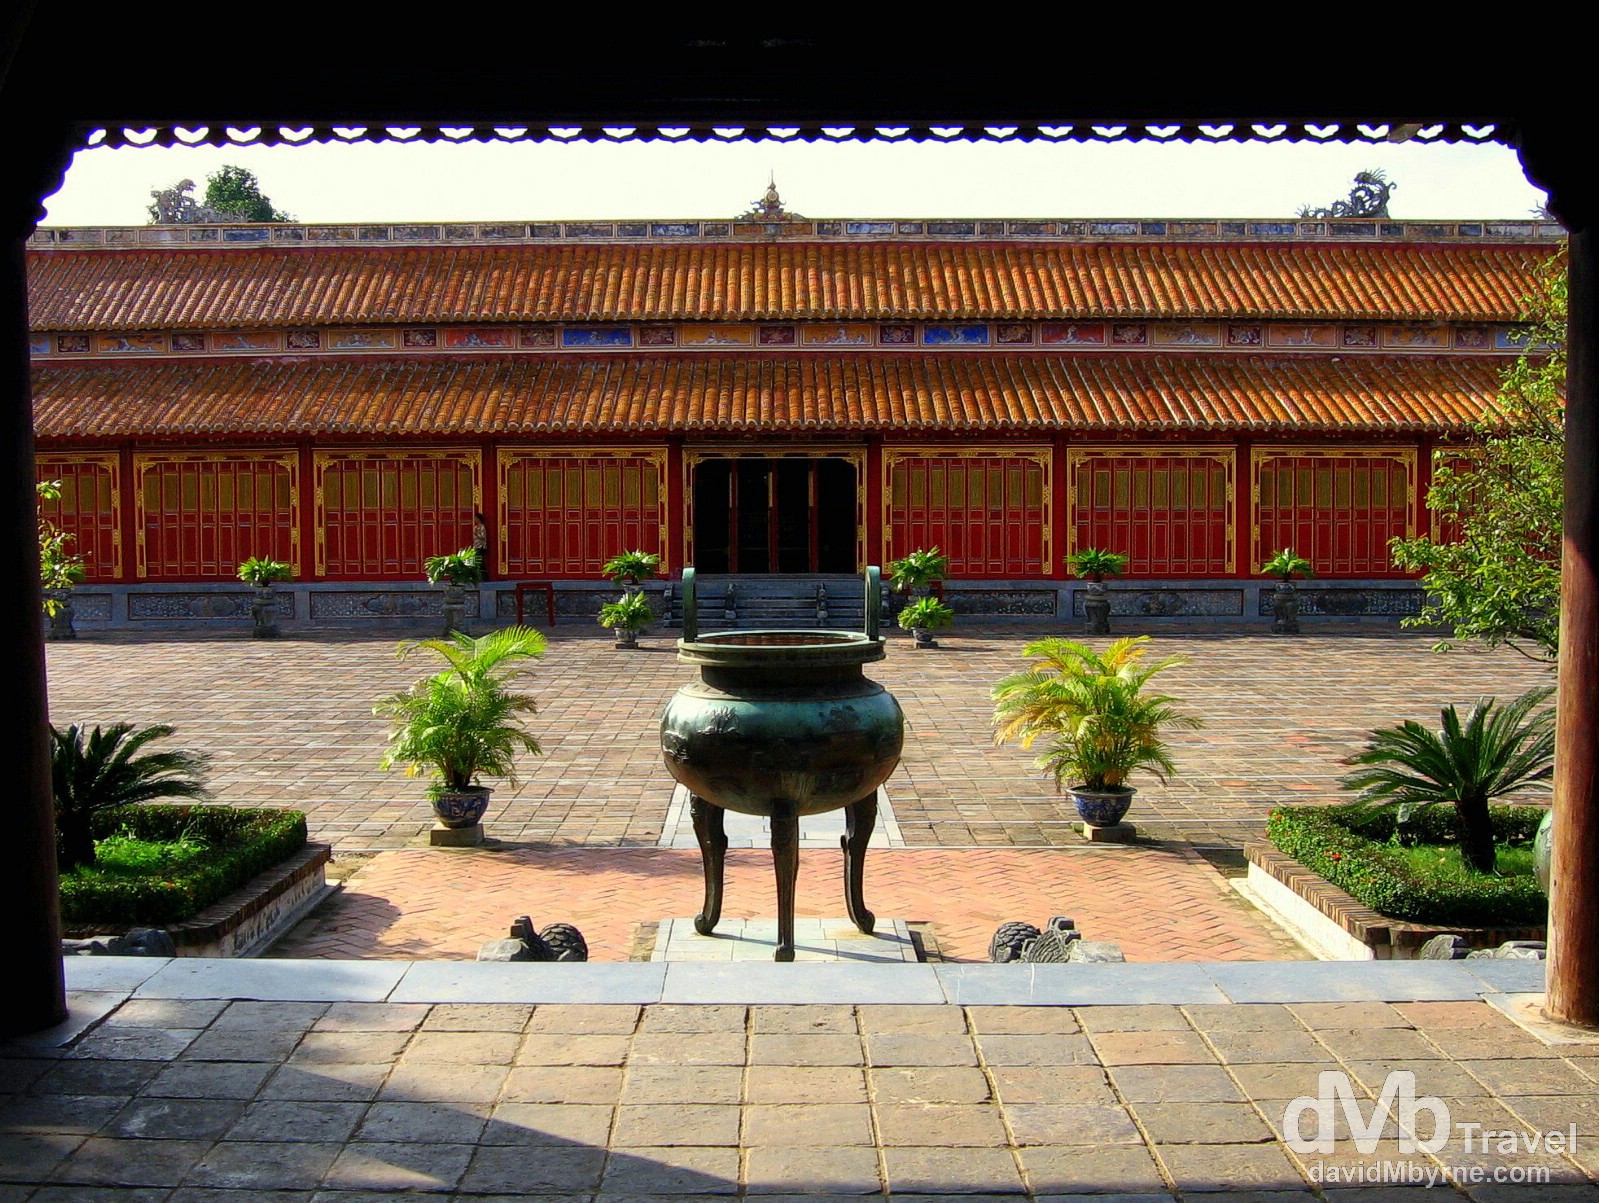 In the grounds of the ancient UNESCO-listed Citadel in Hue, Central Vietnam. September 7th, 2005.